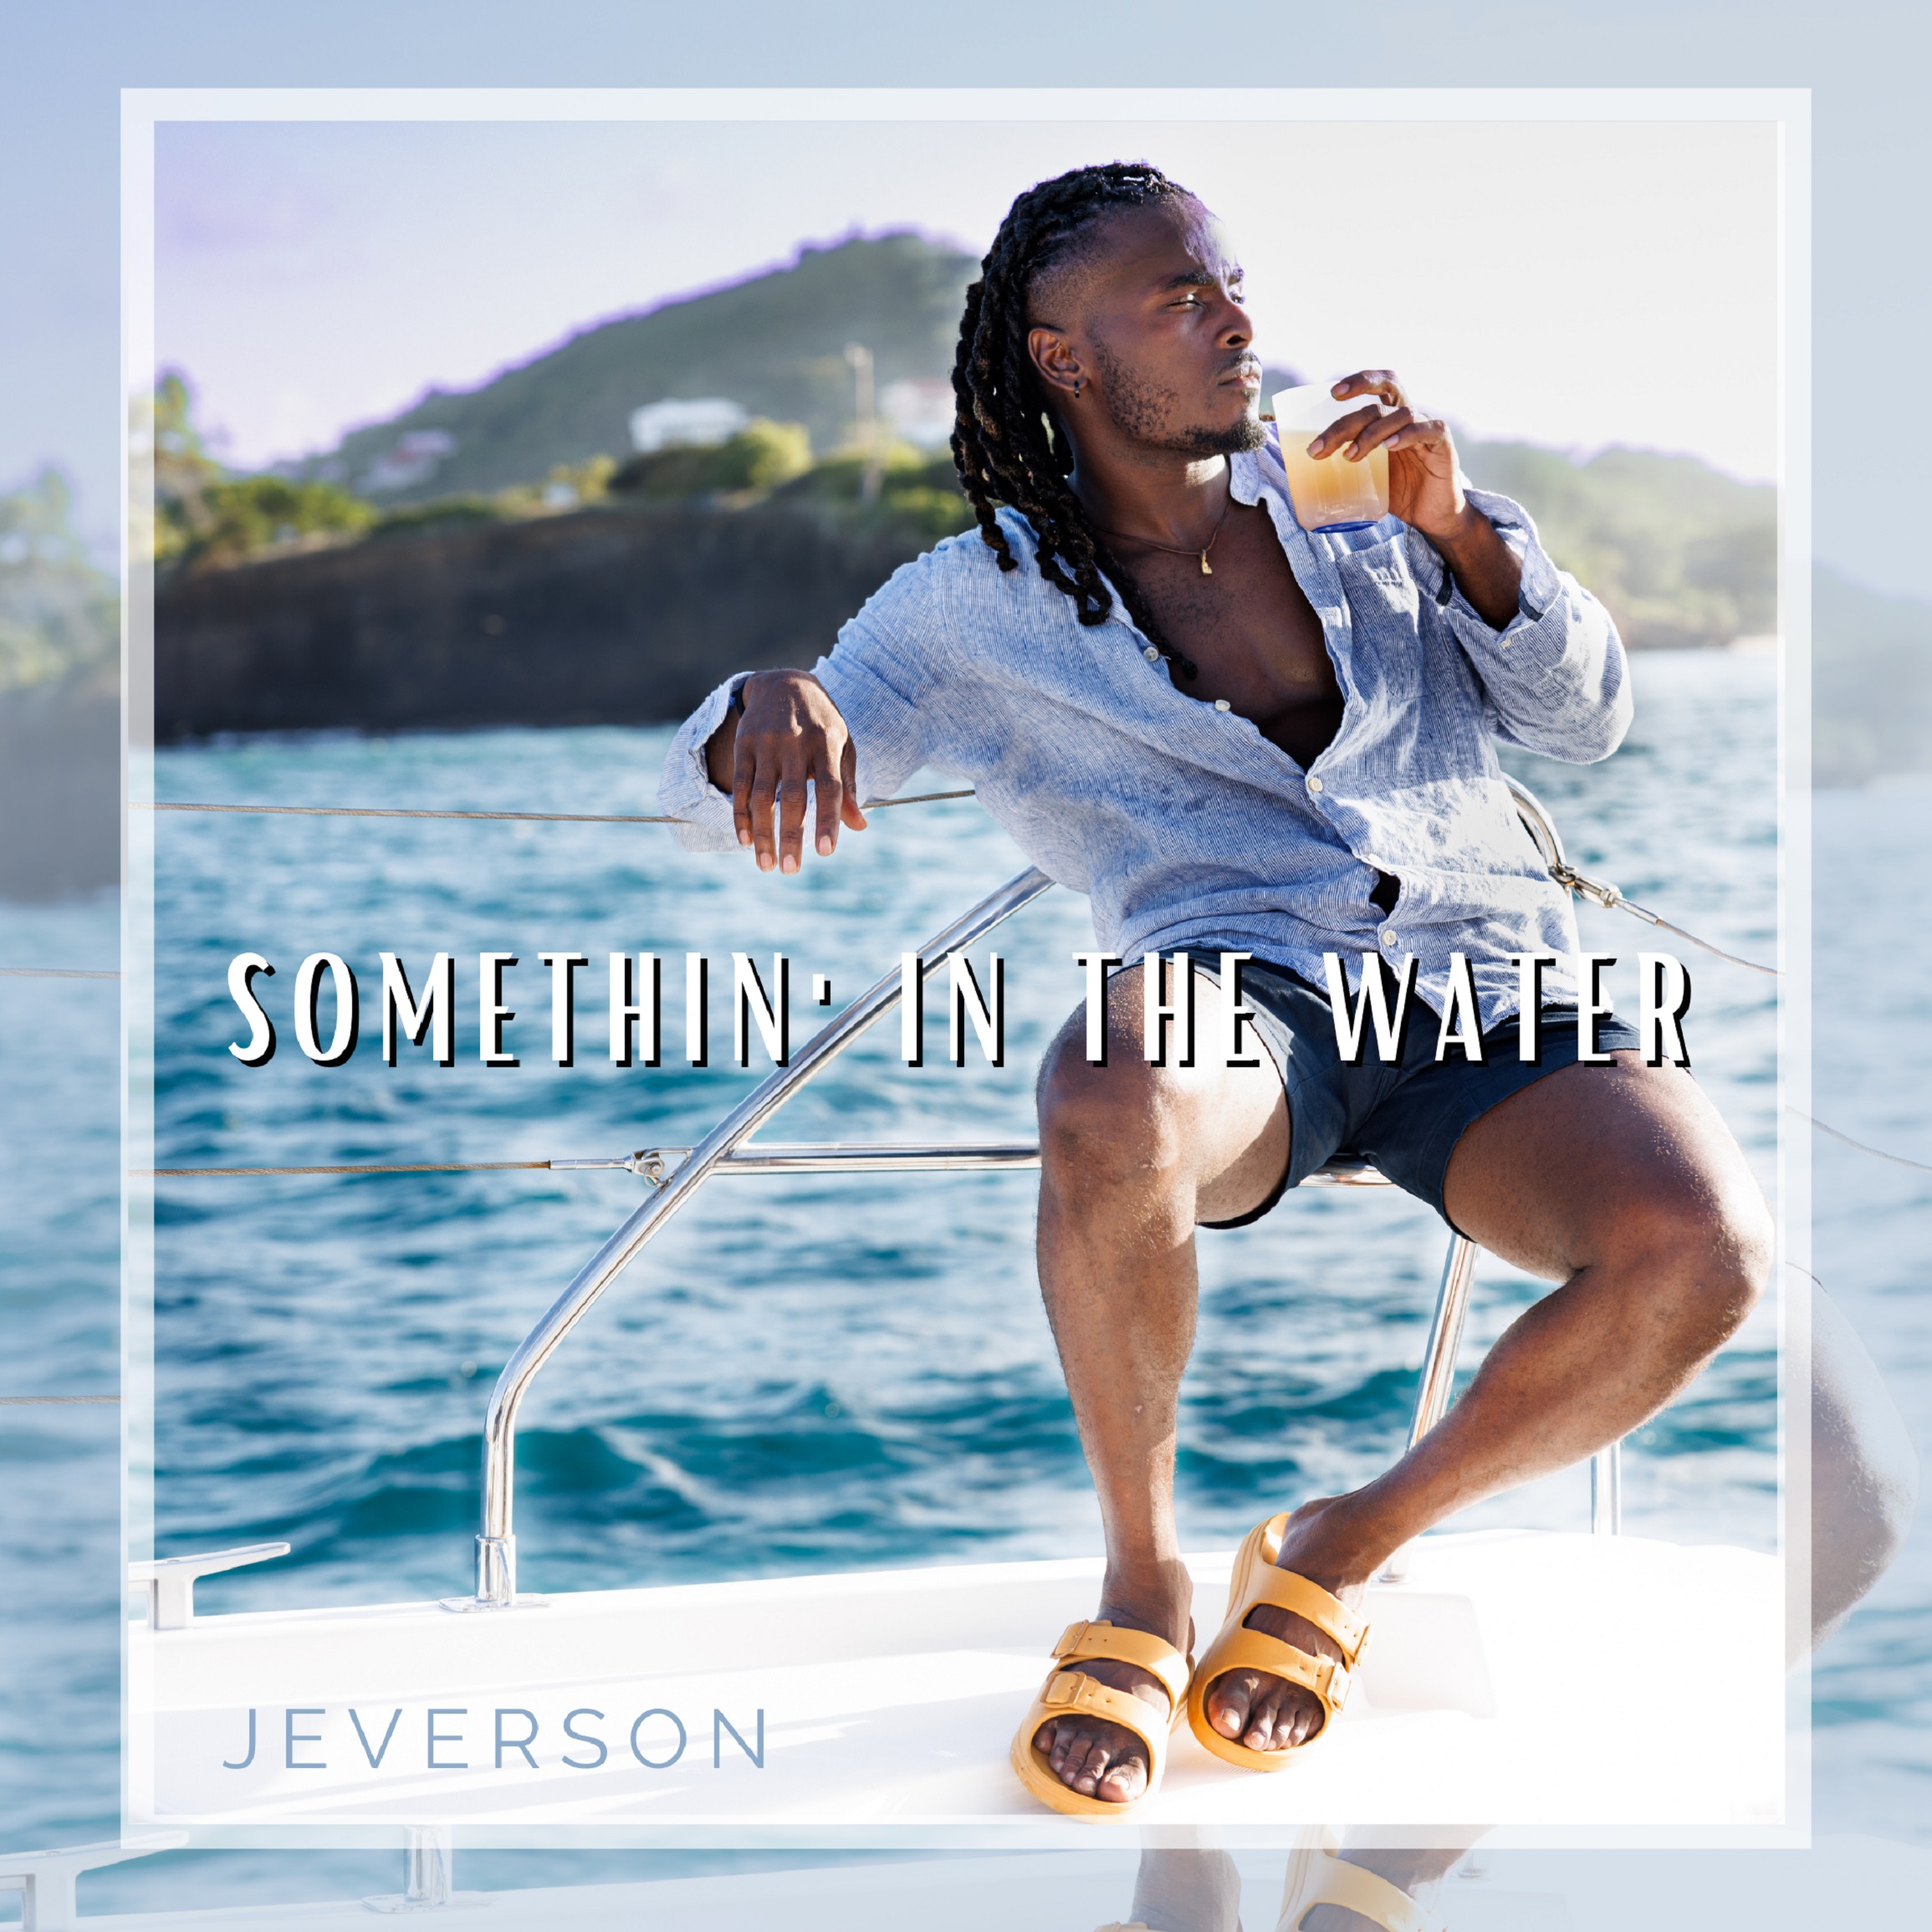 Jeverson Releases Feel-Good Single "Somethin' in the Water"